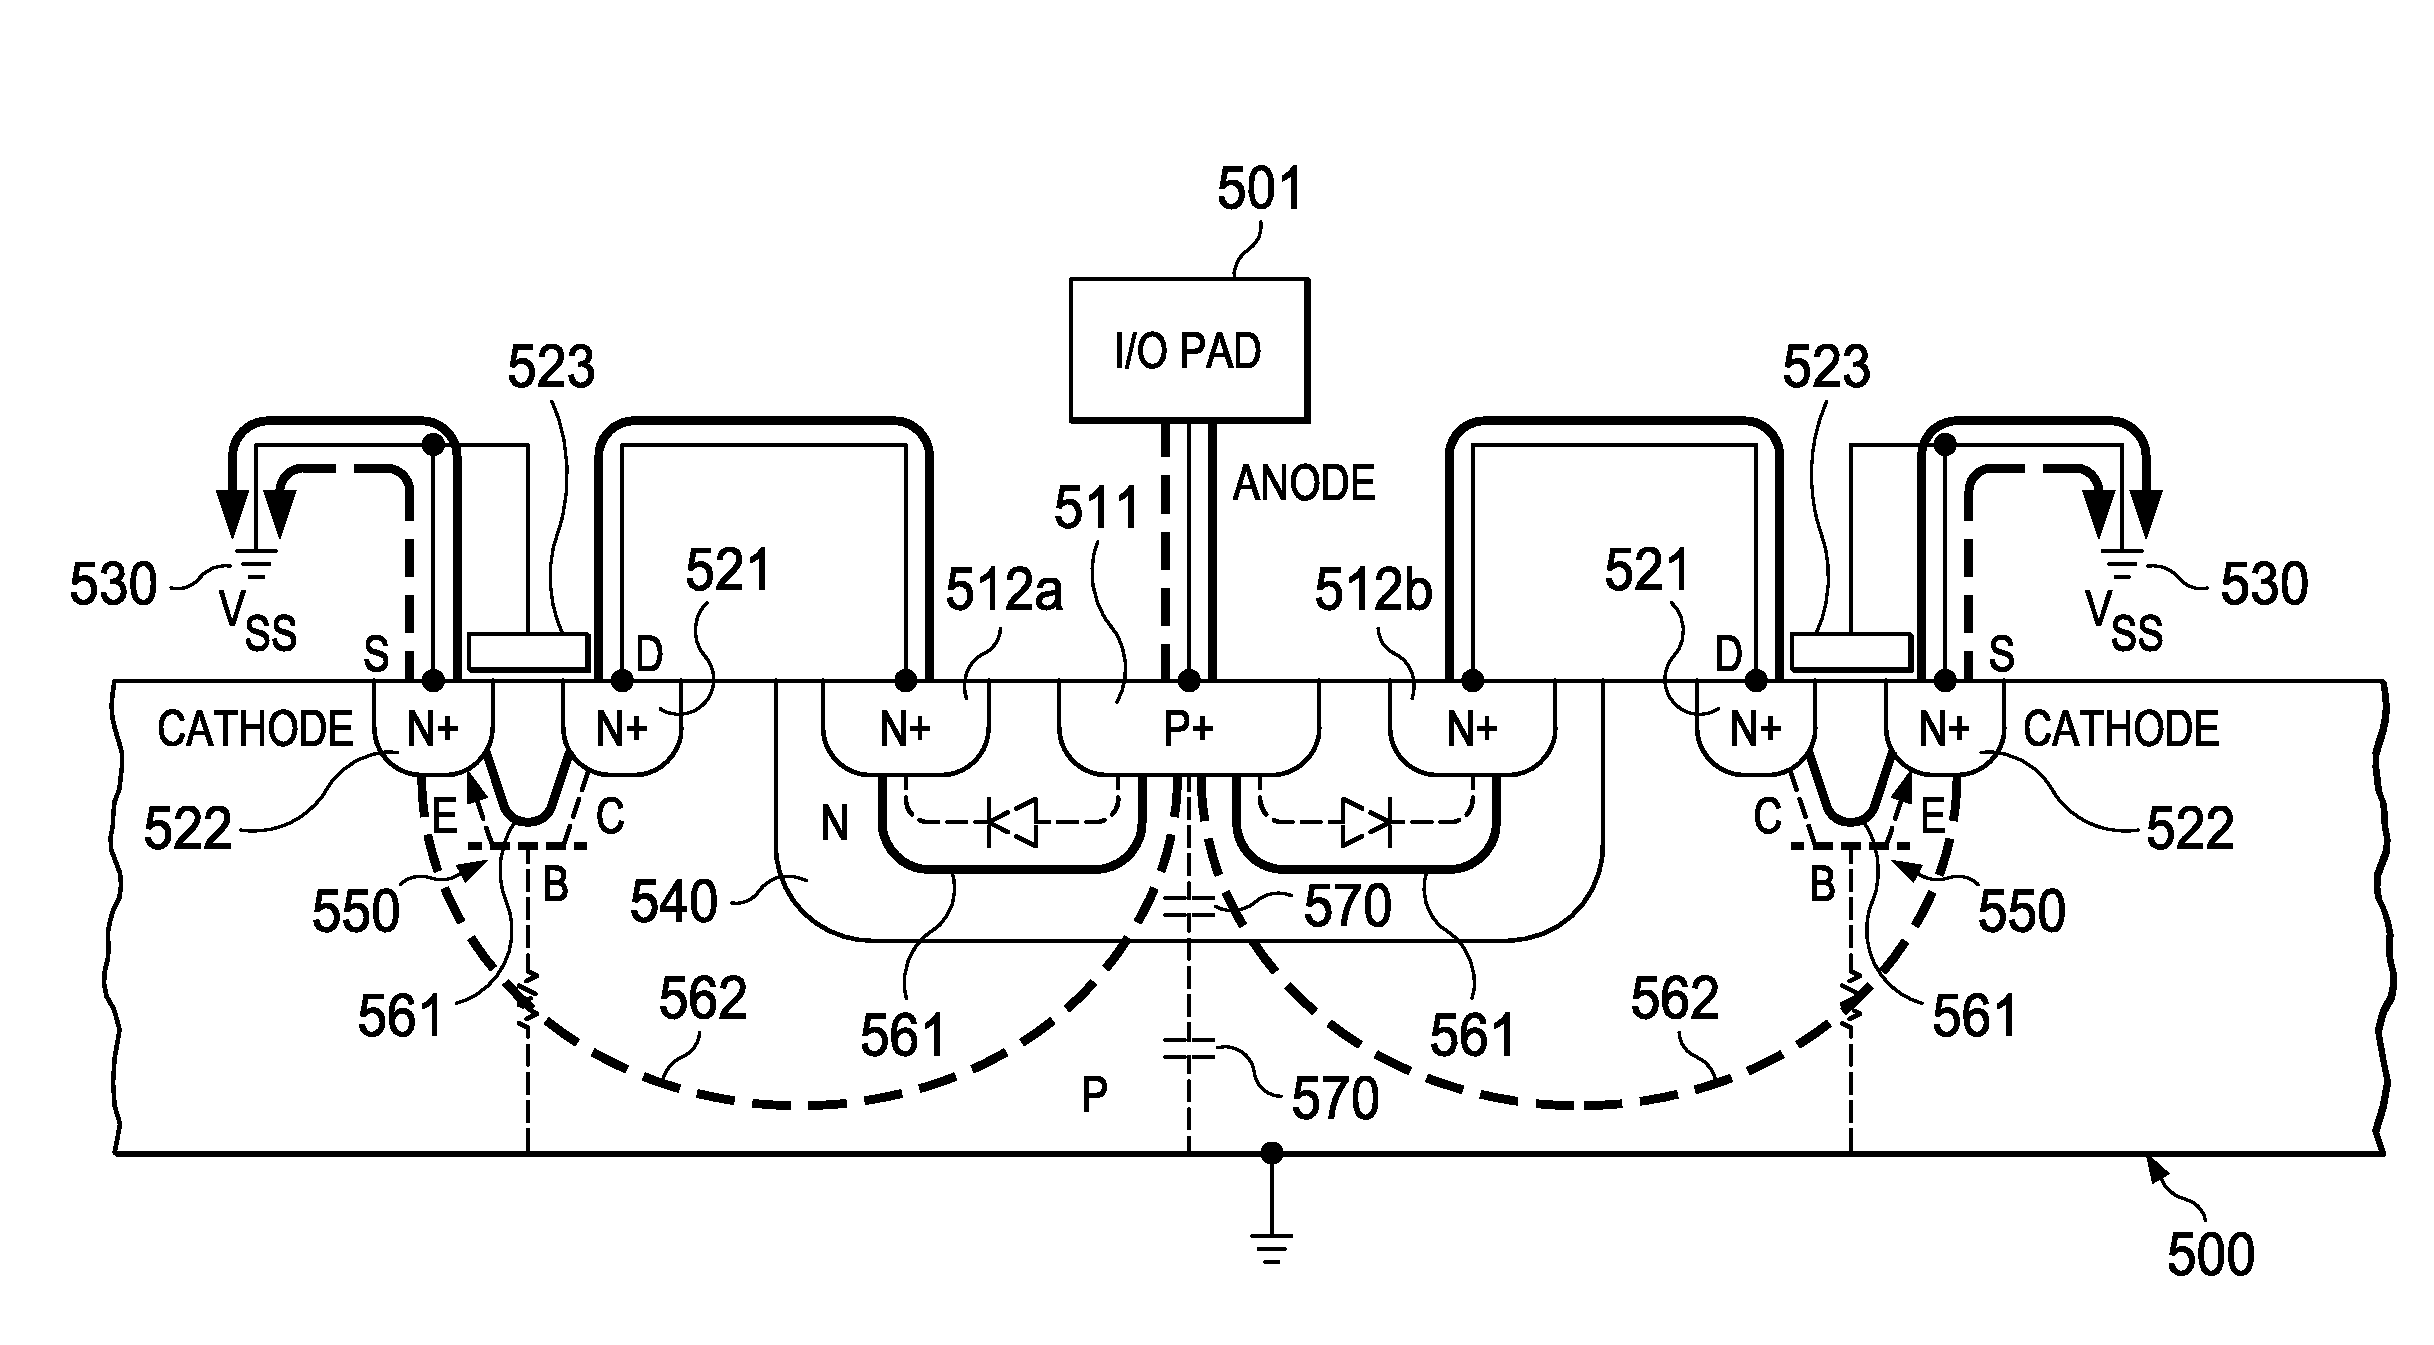 Electrostatic discharge protection having multiply segmented diodes in proximity to transistor